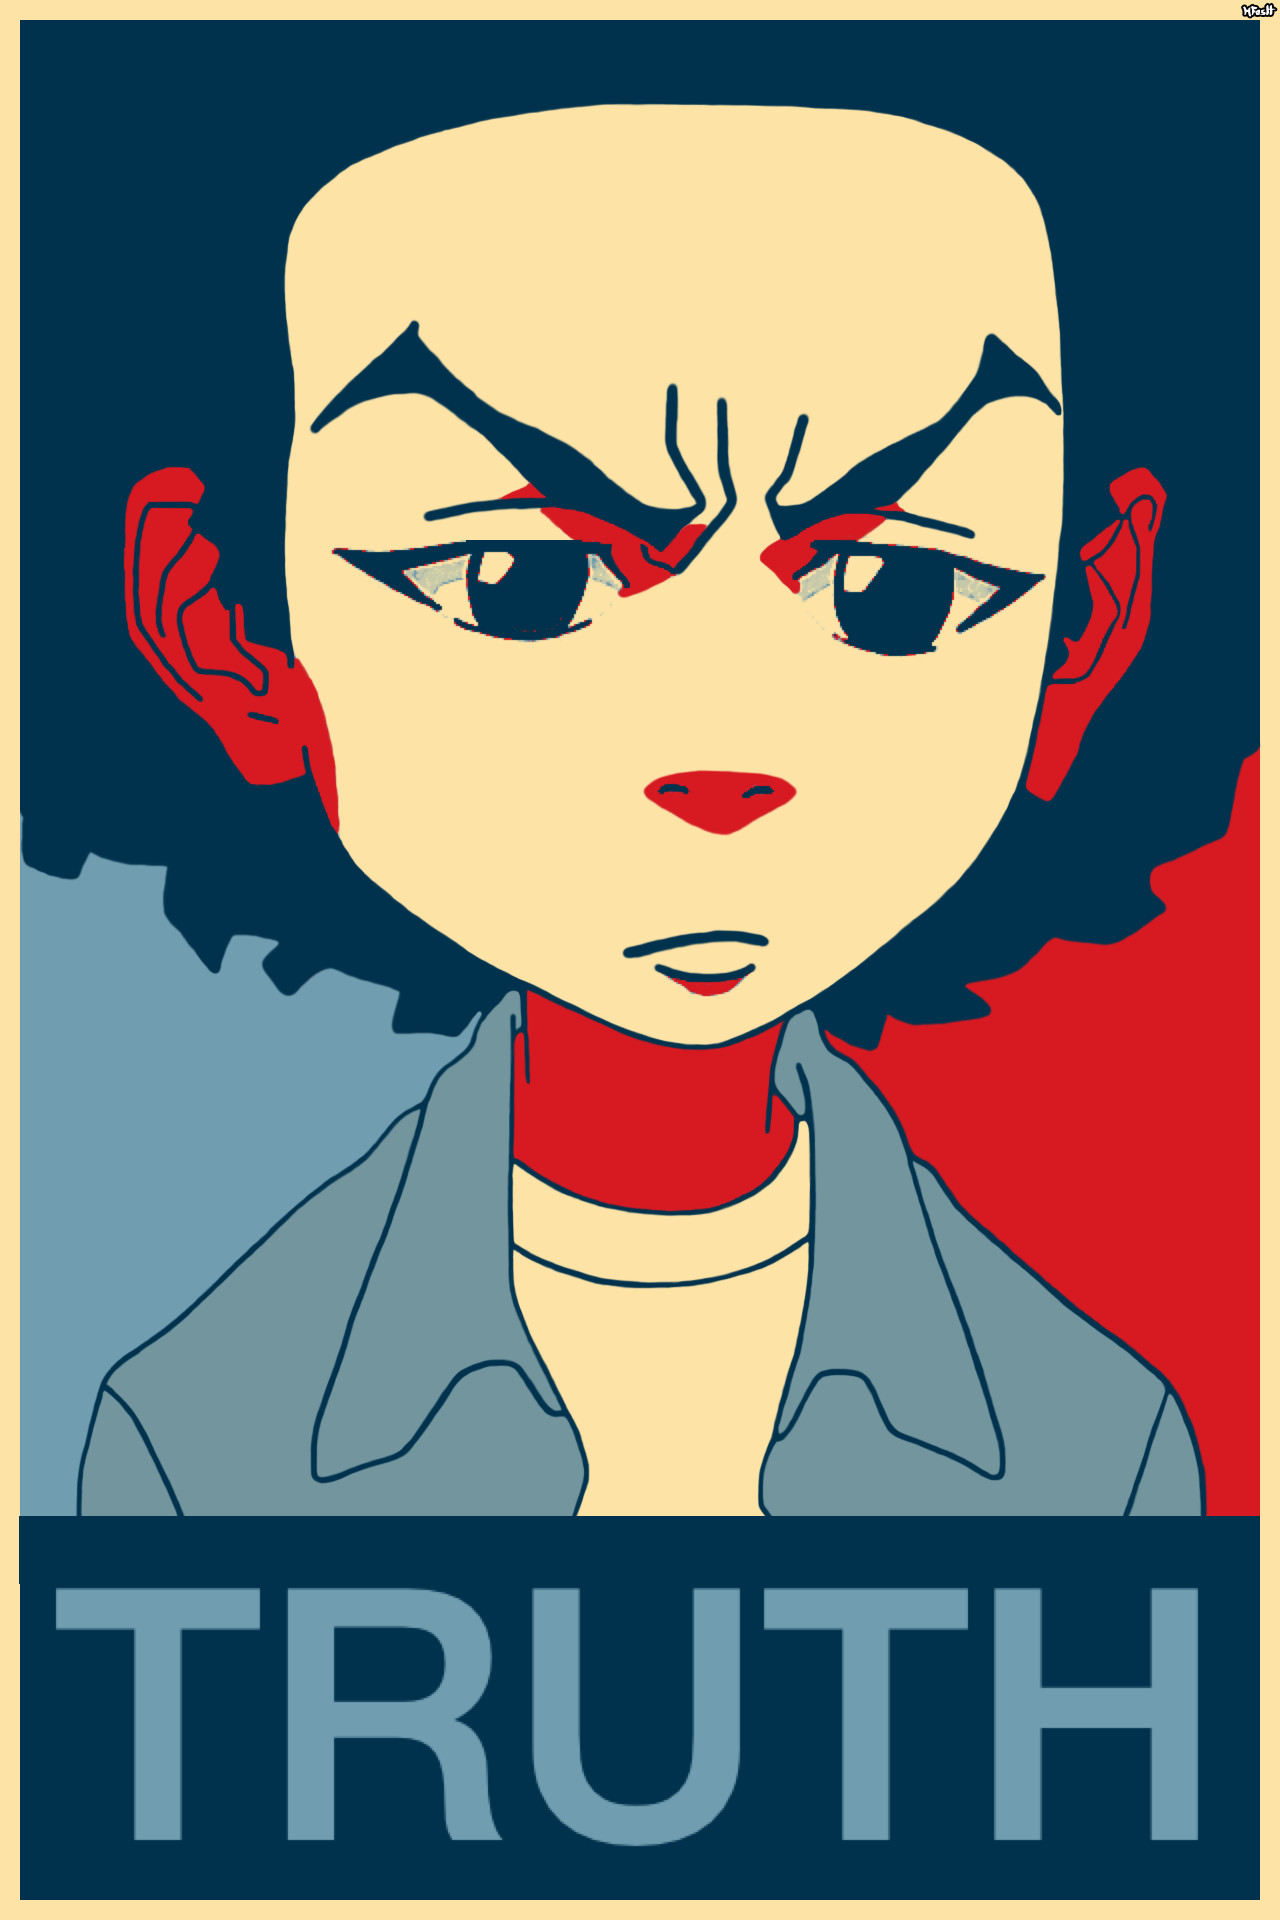 Huey Freeman Only Speaks The Truth / The Boondocks What people need is the truth